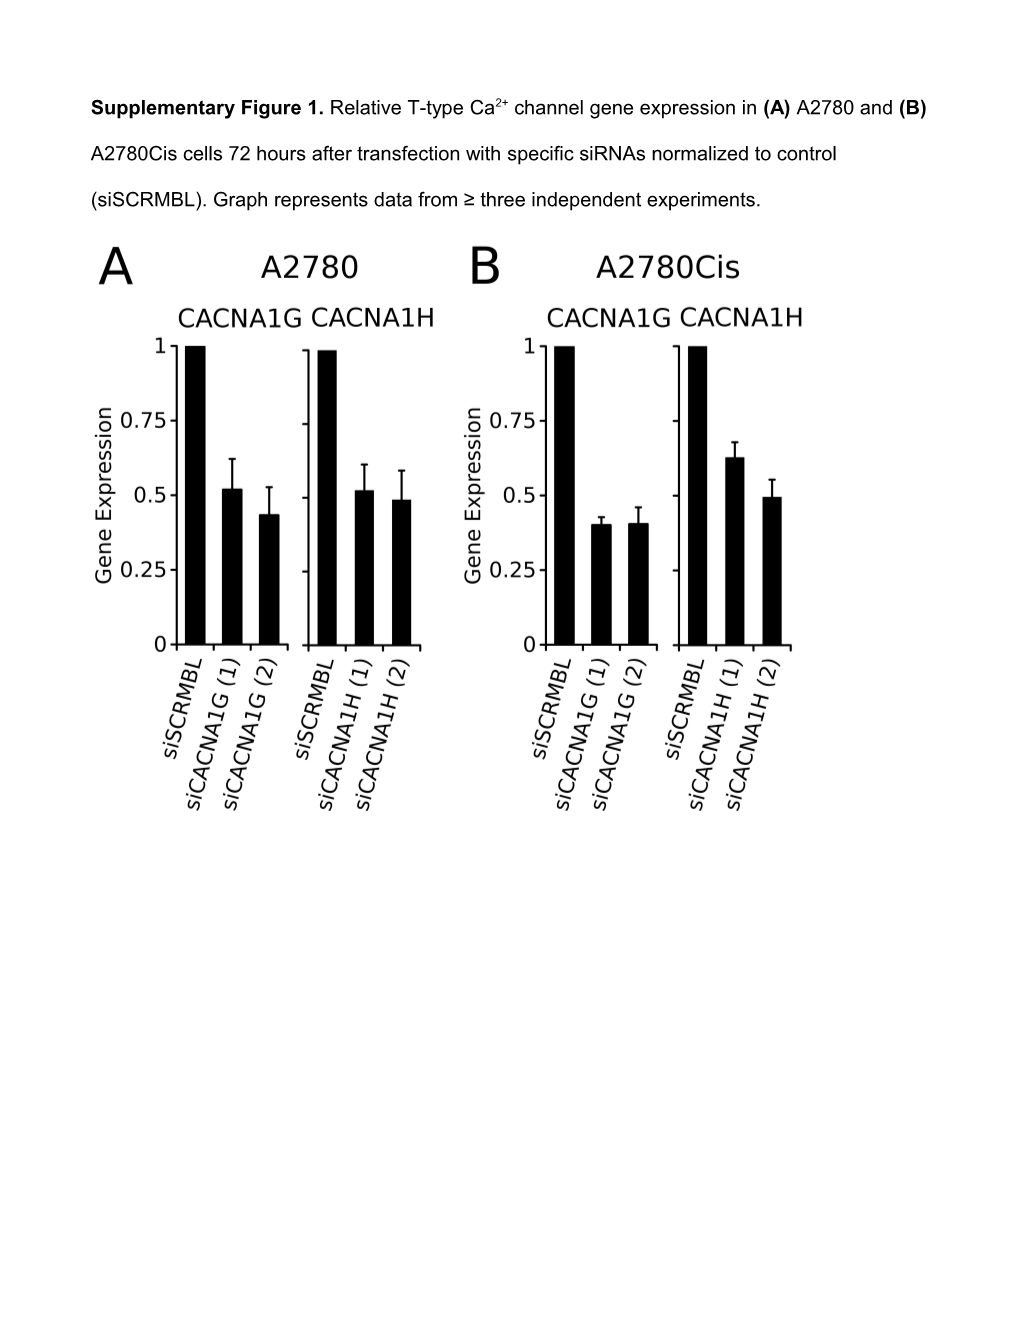 Supplementary Figure 1. Relative T-Type Ca2+ Channel Gene Expression in (A) A2780 And